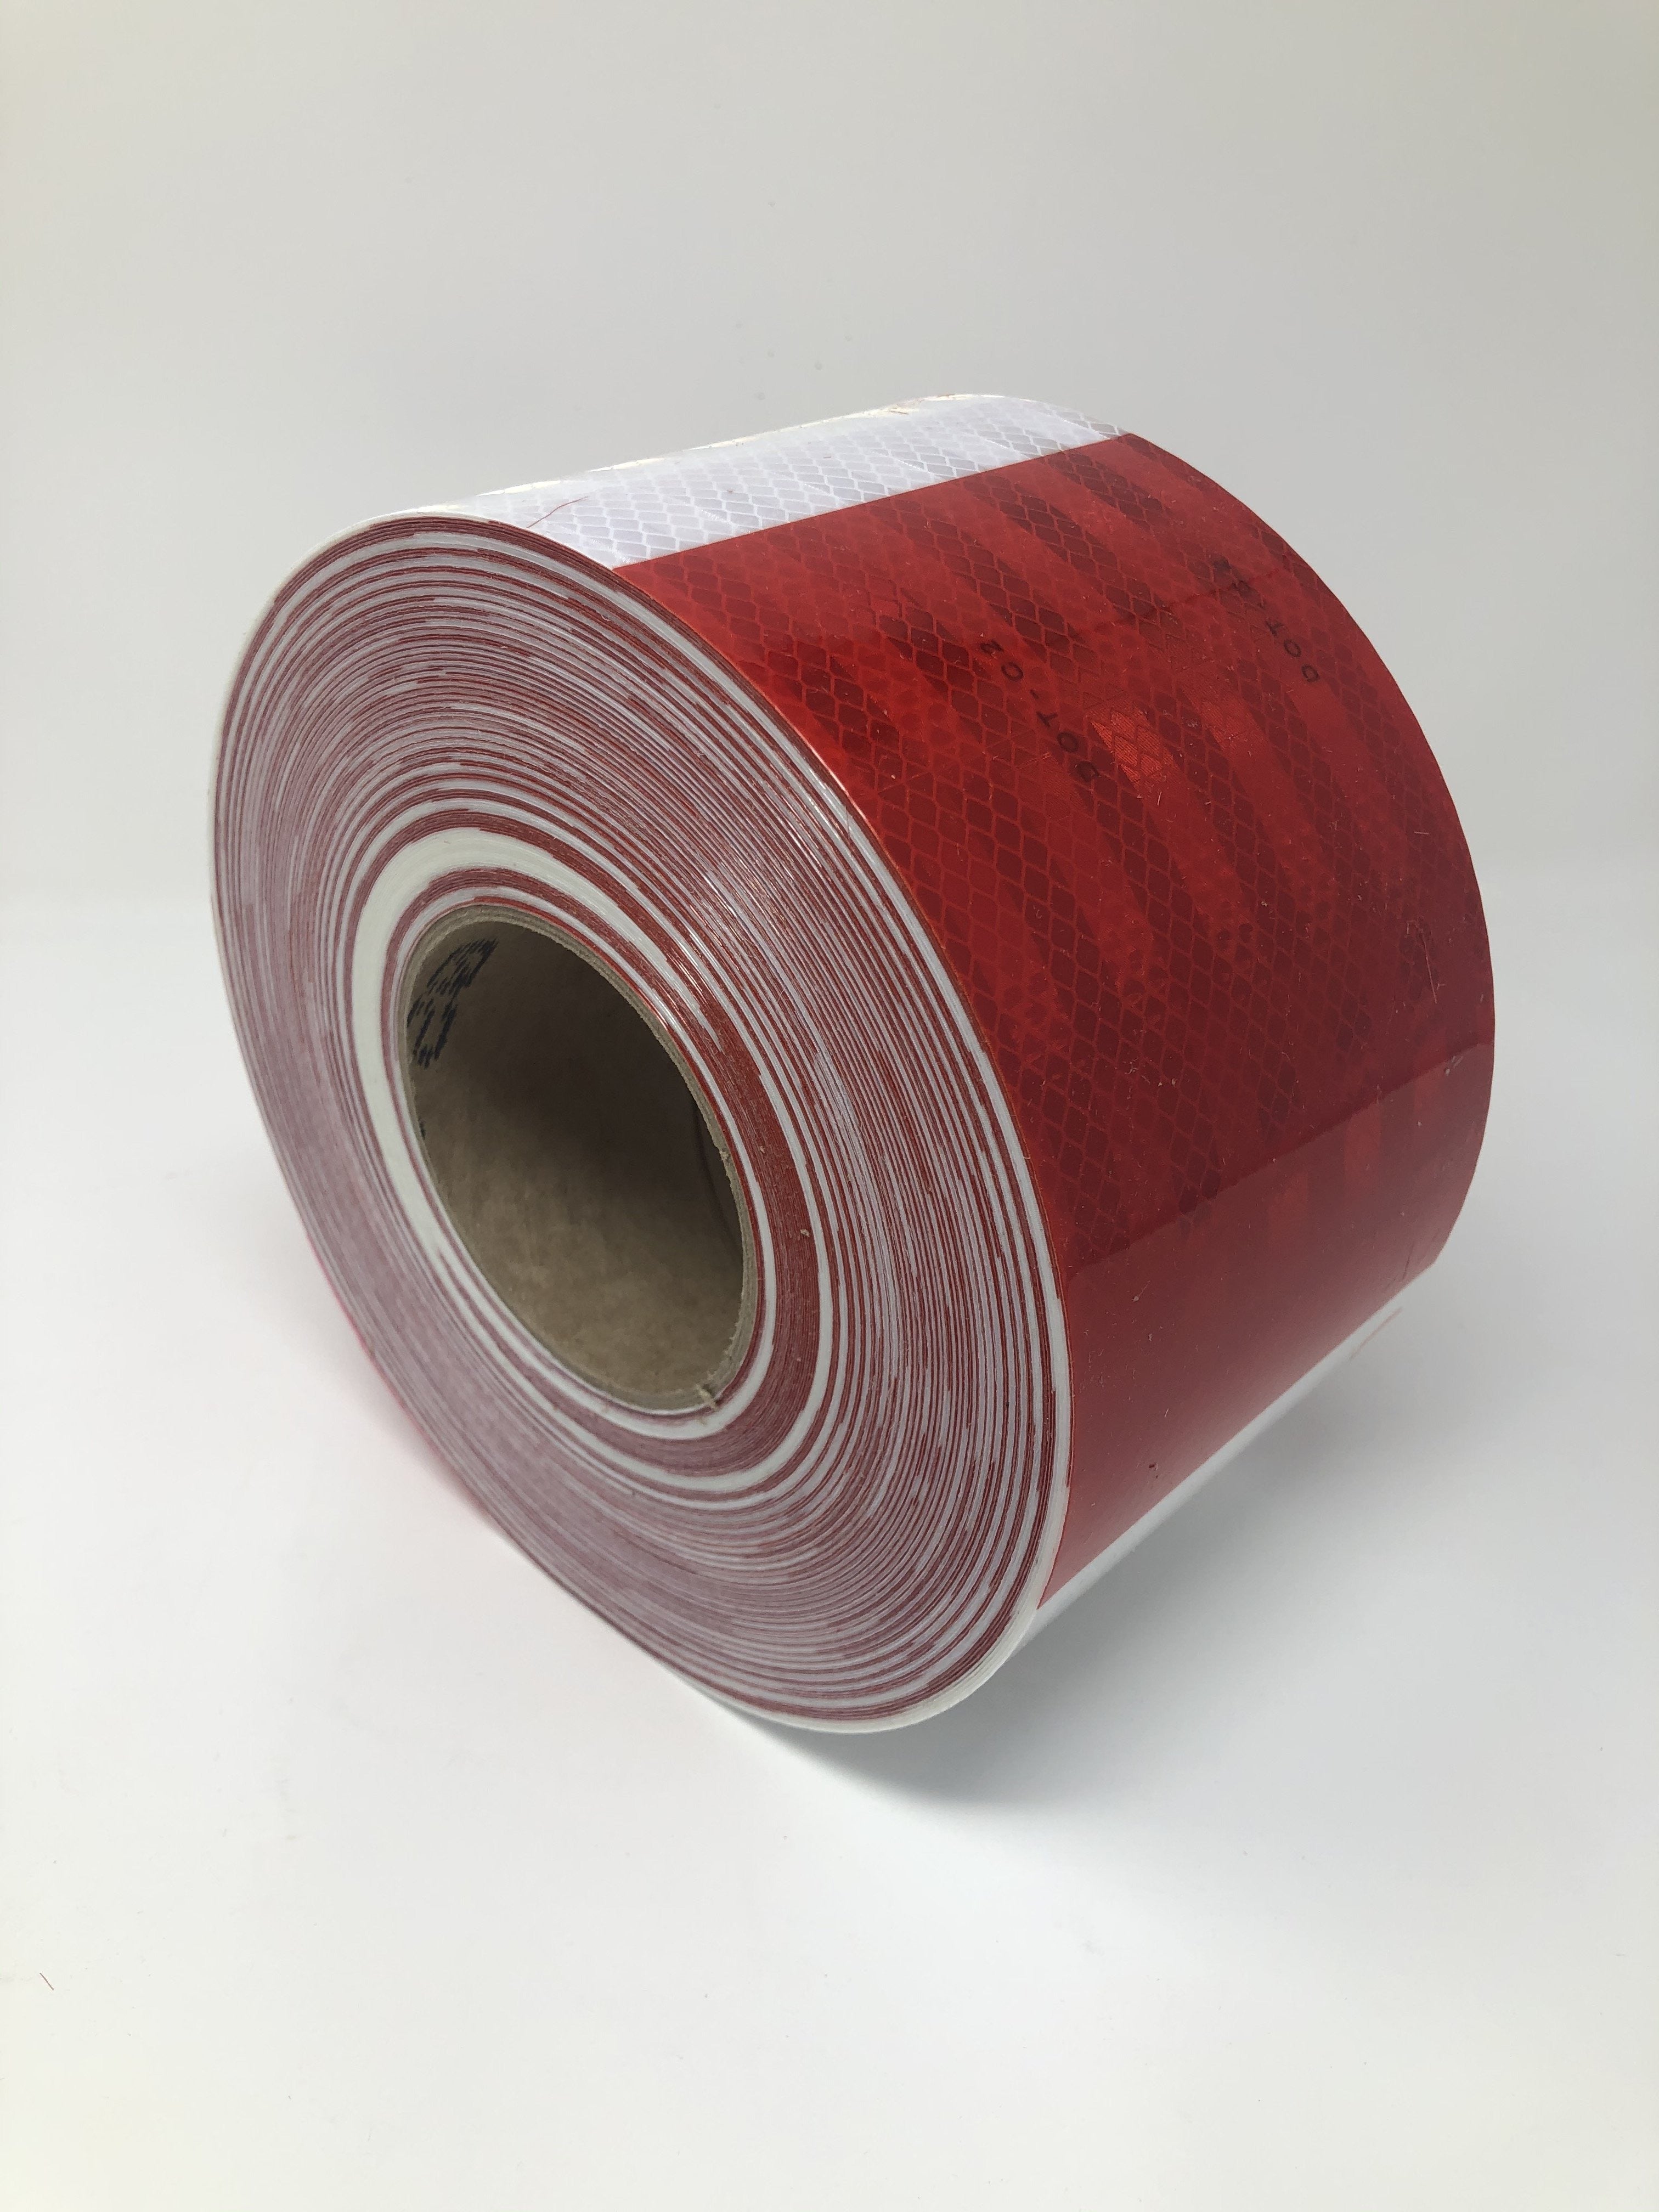 4" x 150' Roll 3M 983-326 6" RED / 6" WHITE DOT Reflective Conspicuity Tape